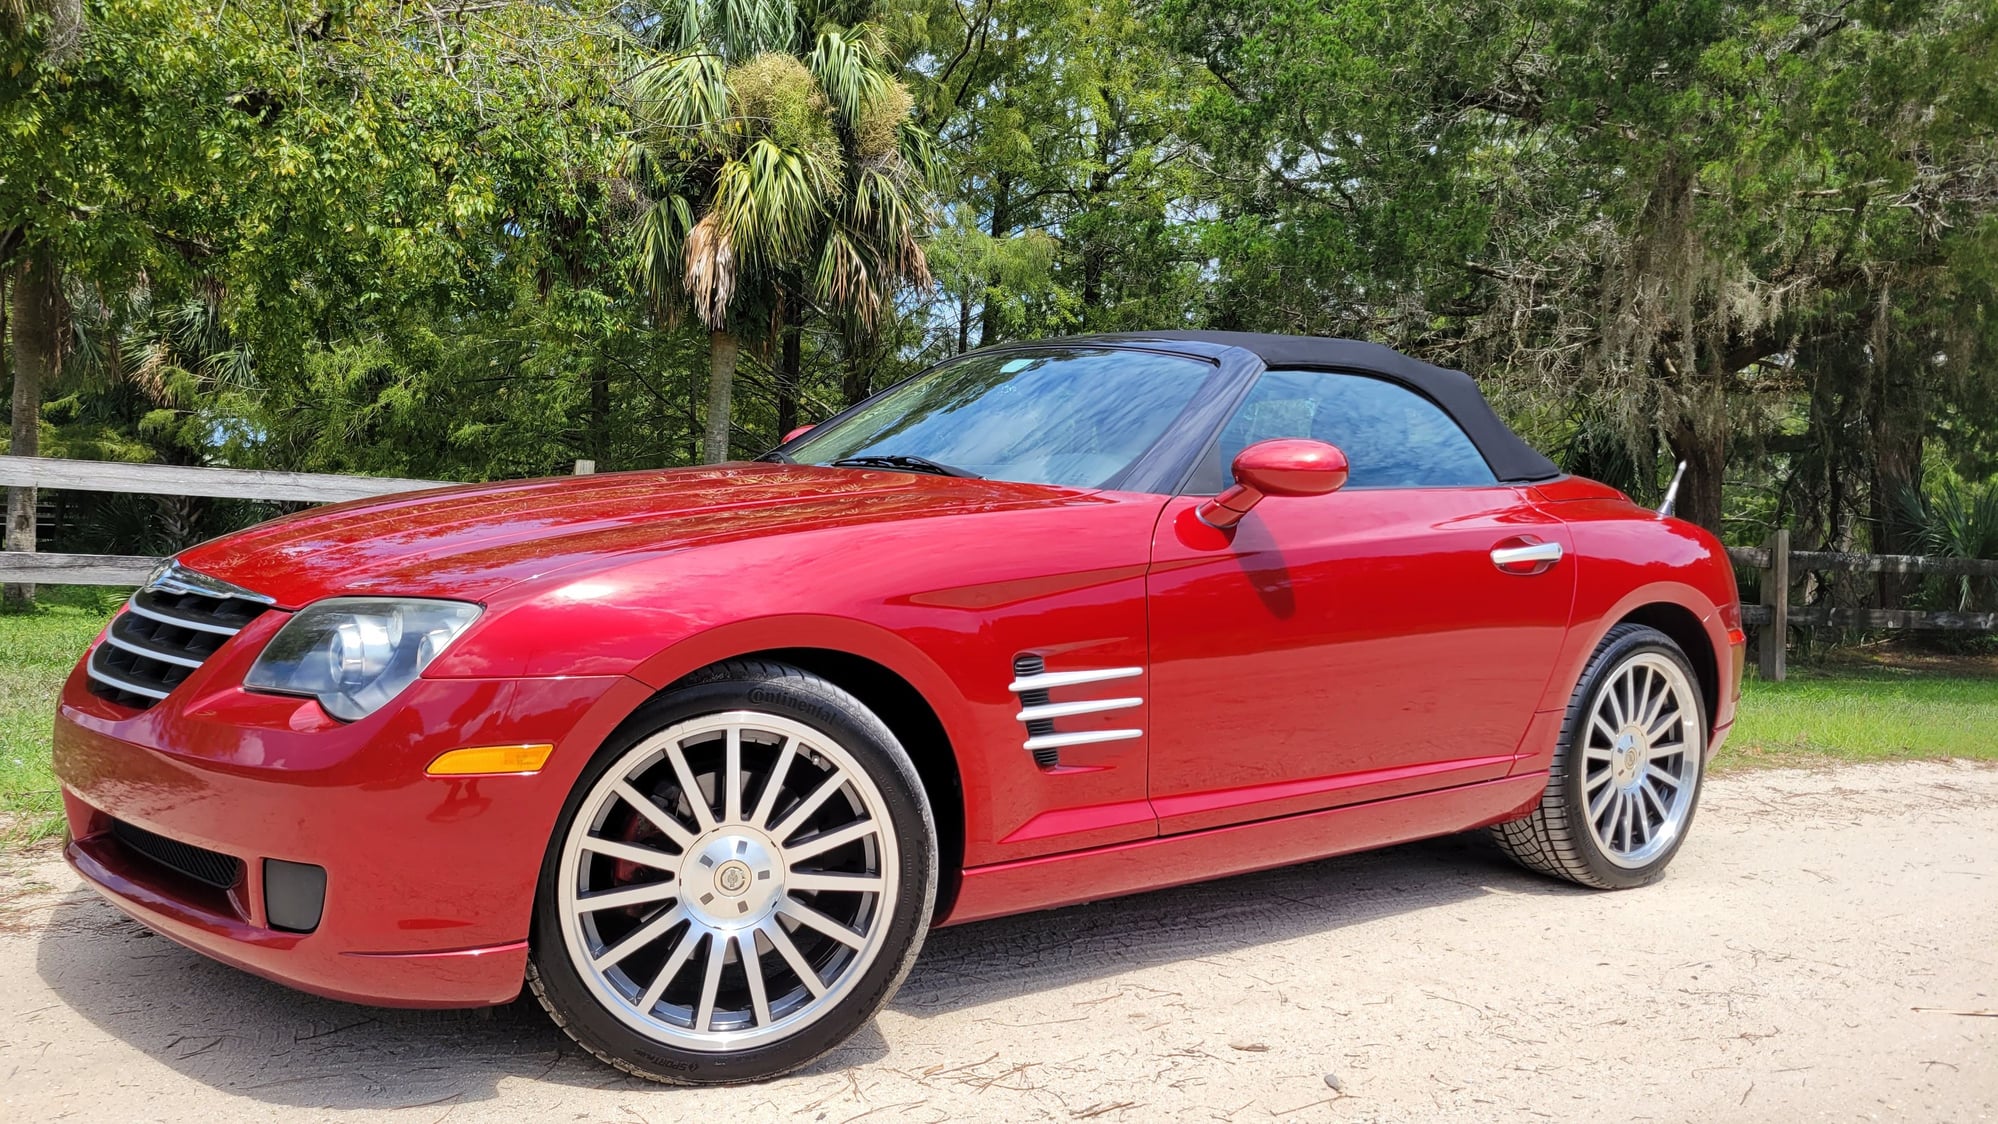 2005 Chrysler Crossfire - Great condition Garage-kept 2005 Crossfire convertible - Used - VIN 1C3AN55LX5X058691 - 59,305 Miles - 6 cyl - 2WD - Automatic - Convertible - Red - Palm Coast, FL 32164, United States